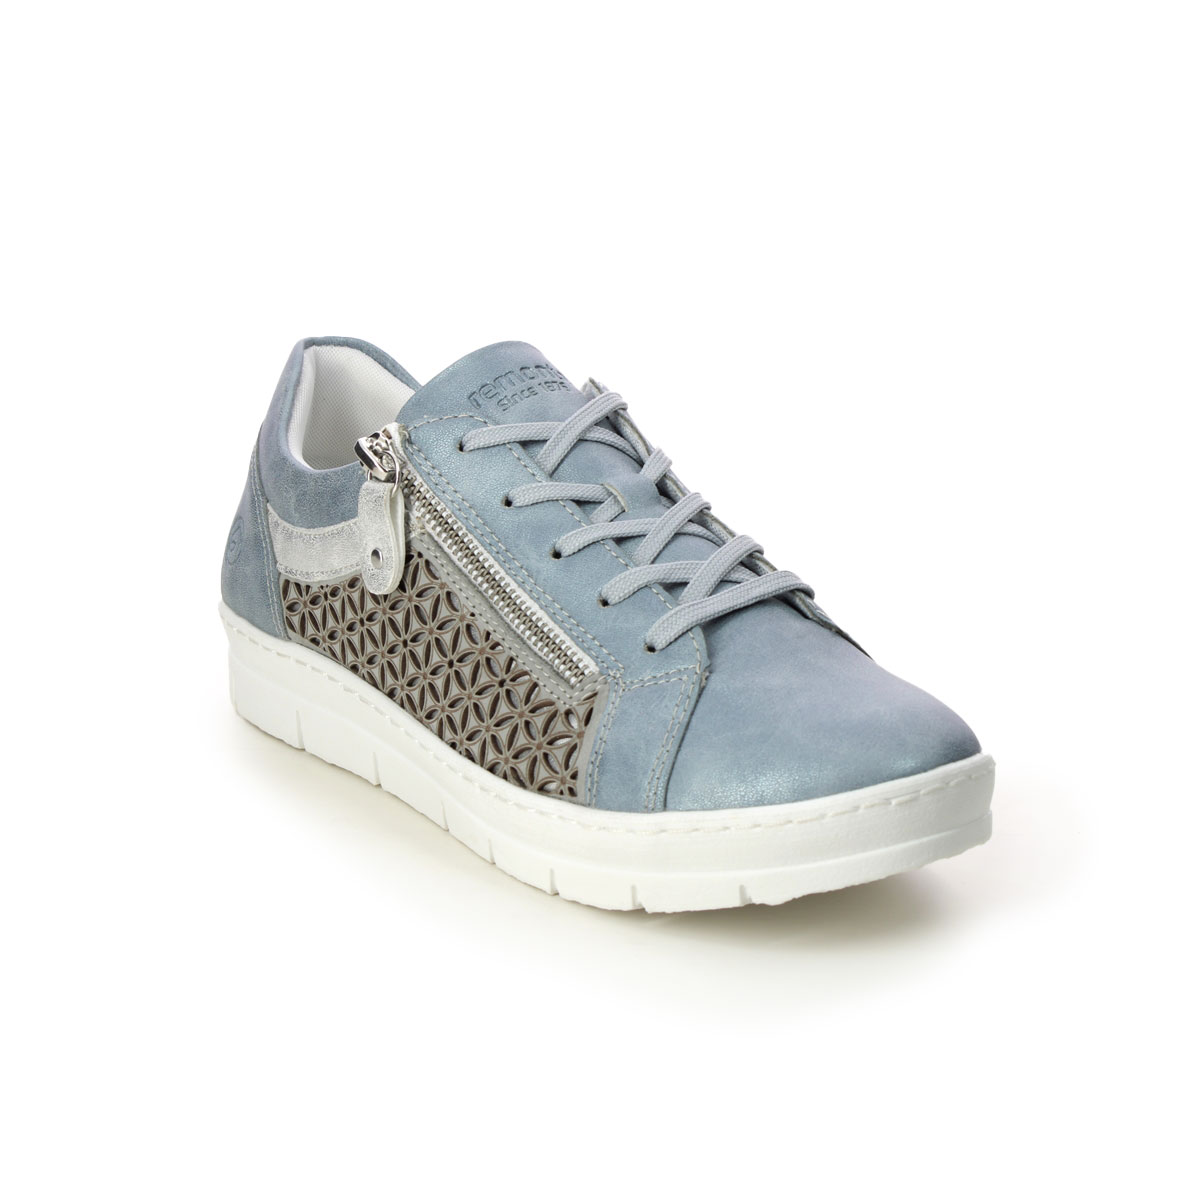 Remonte D5830-12 Ravenna 11 Denim leather Womens trainers in a Plain Leather and Man-made in Size 39